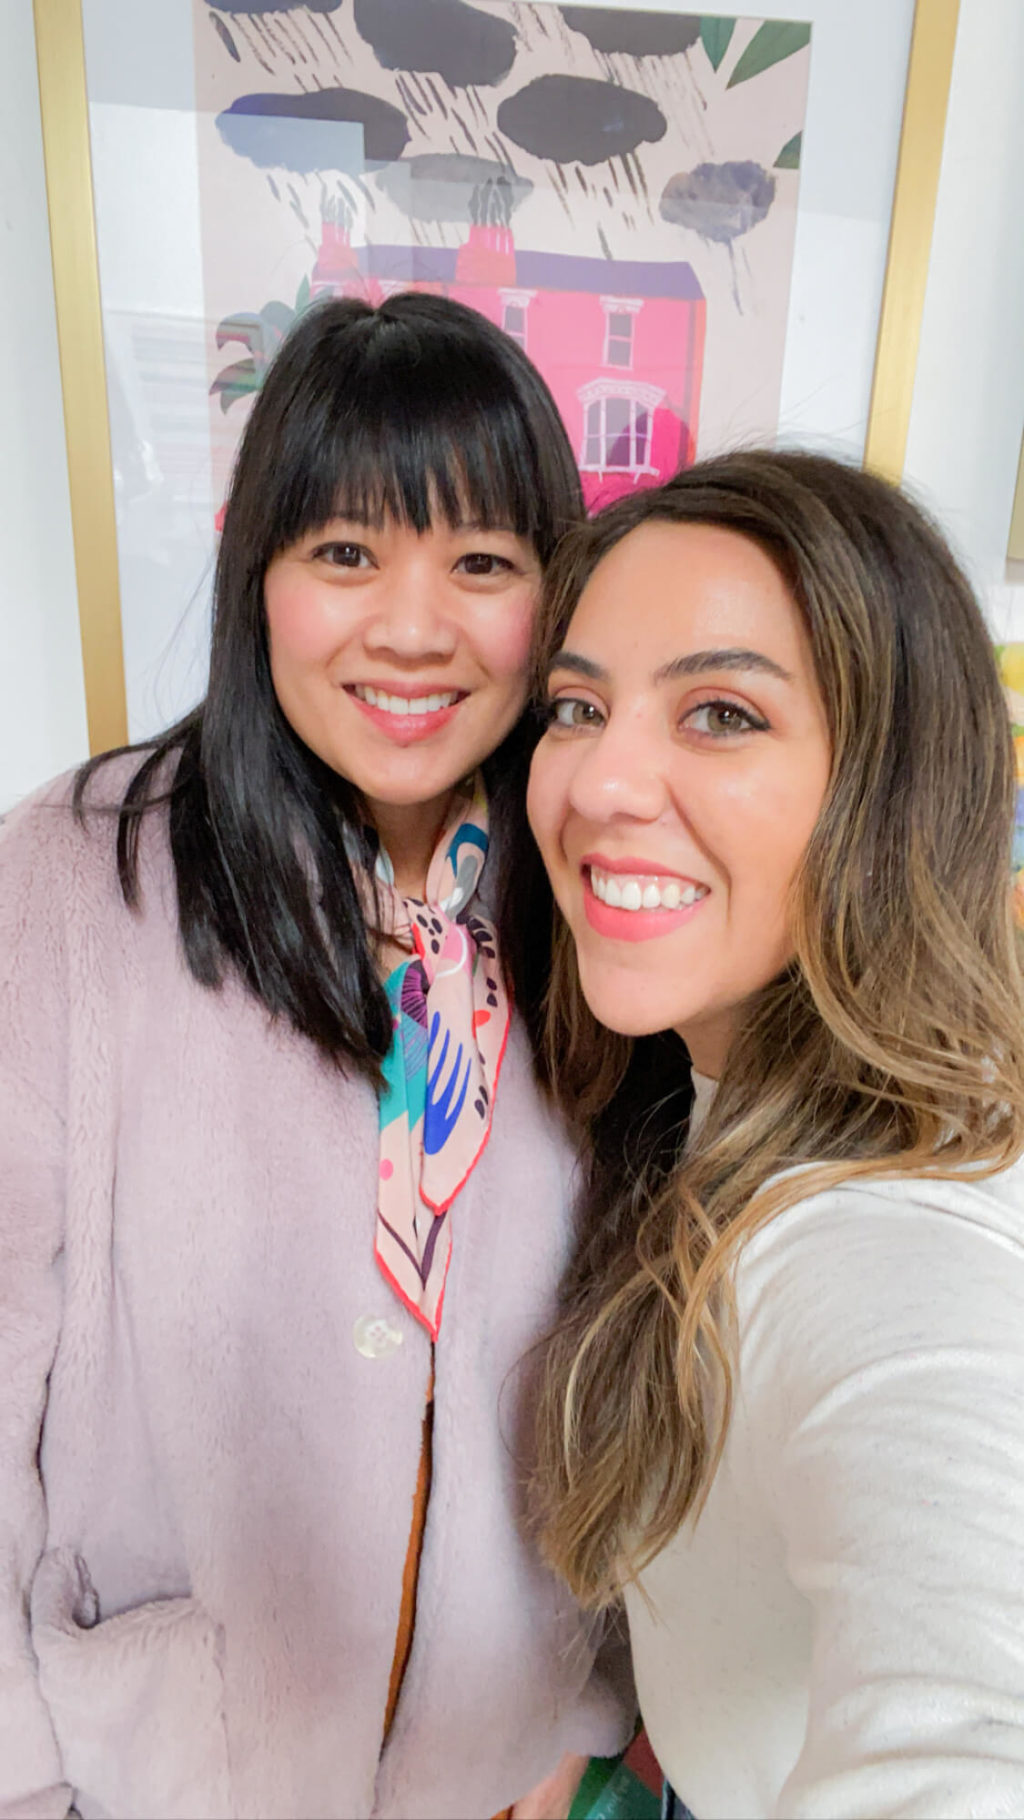 Sharing all about my visit to the Oh Joy studio and what I learned from her at her Oh Joy Workhop! It was so surreal to get a firsthand look at her studio.